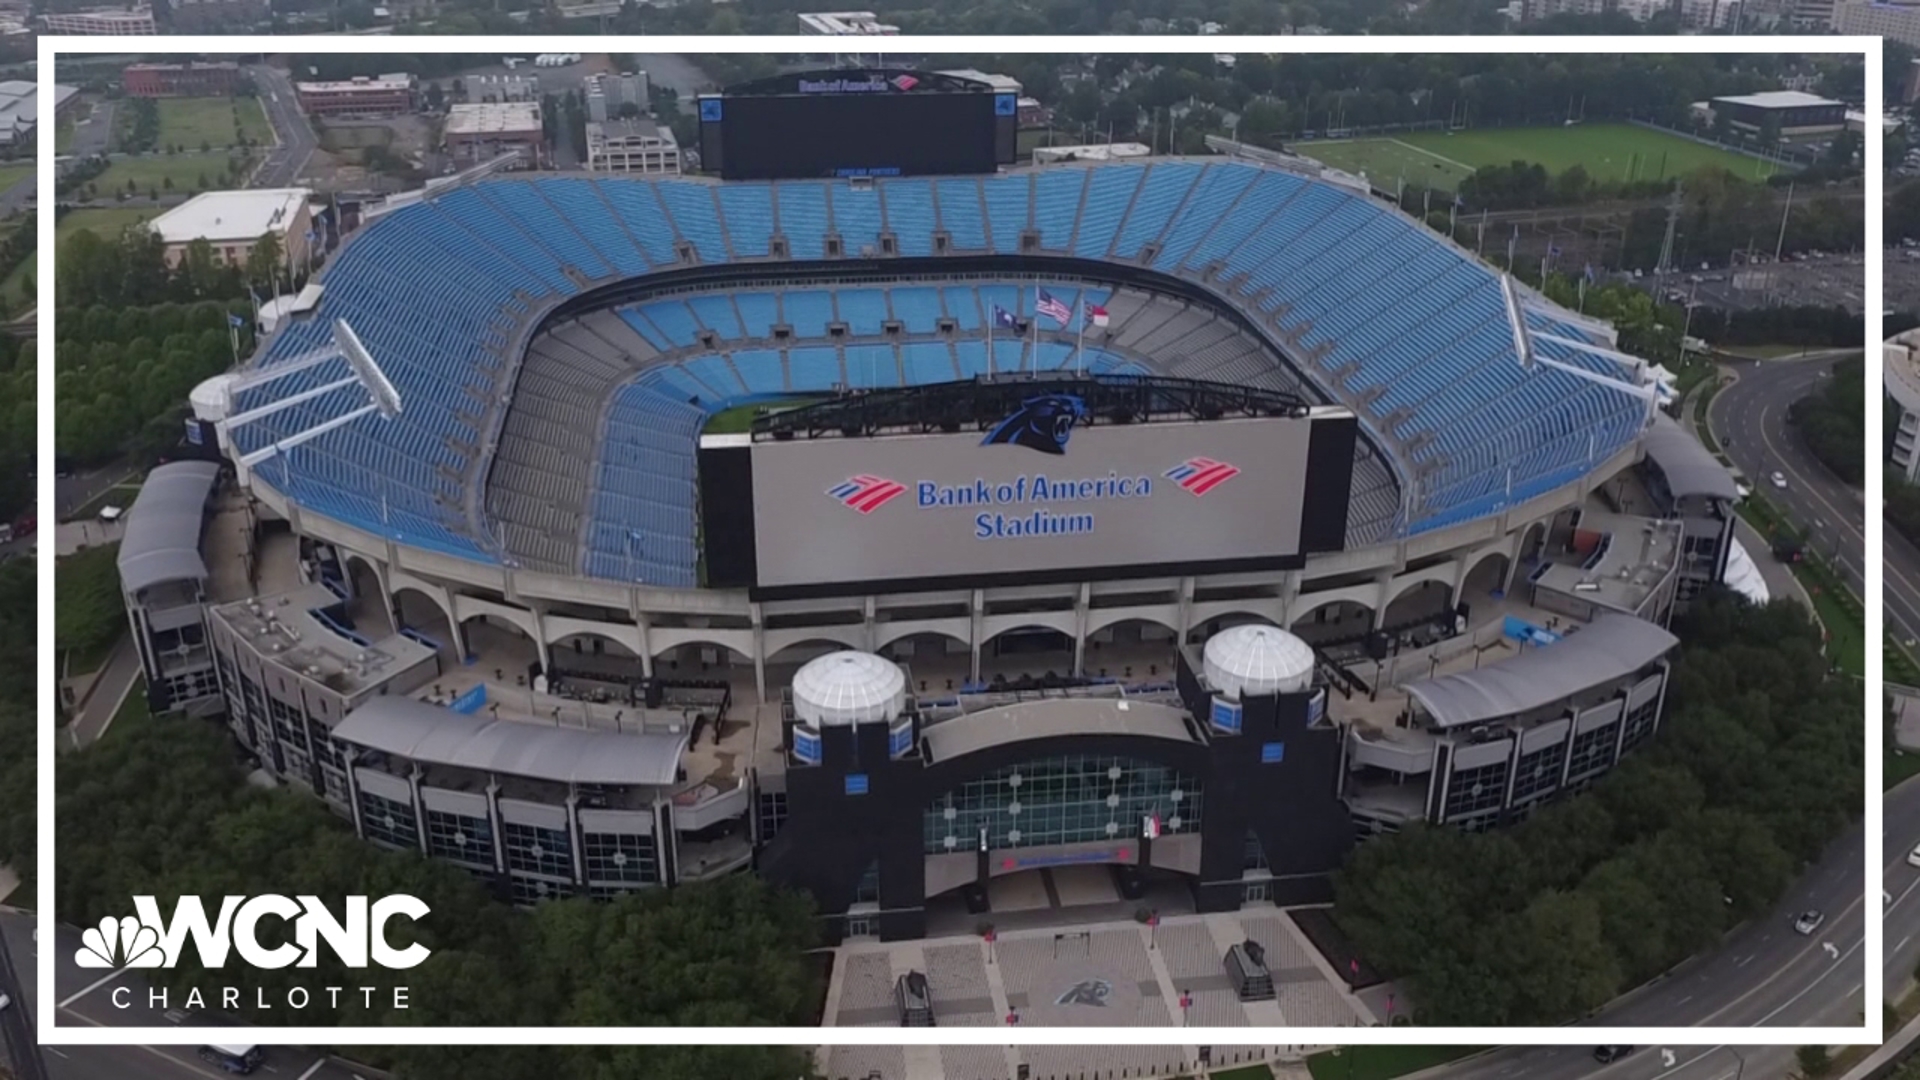 The match is set for 8 p.m. at Bank of America Stadium, and will have a big impact on roads in Uptown Charlotte.